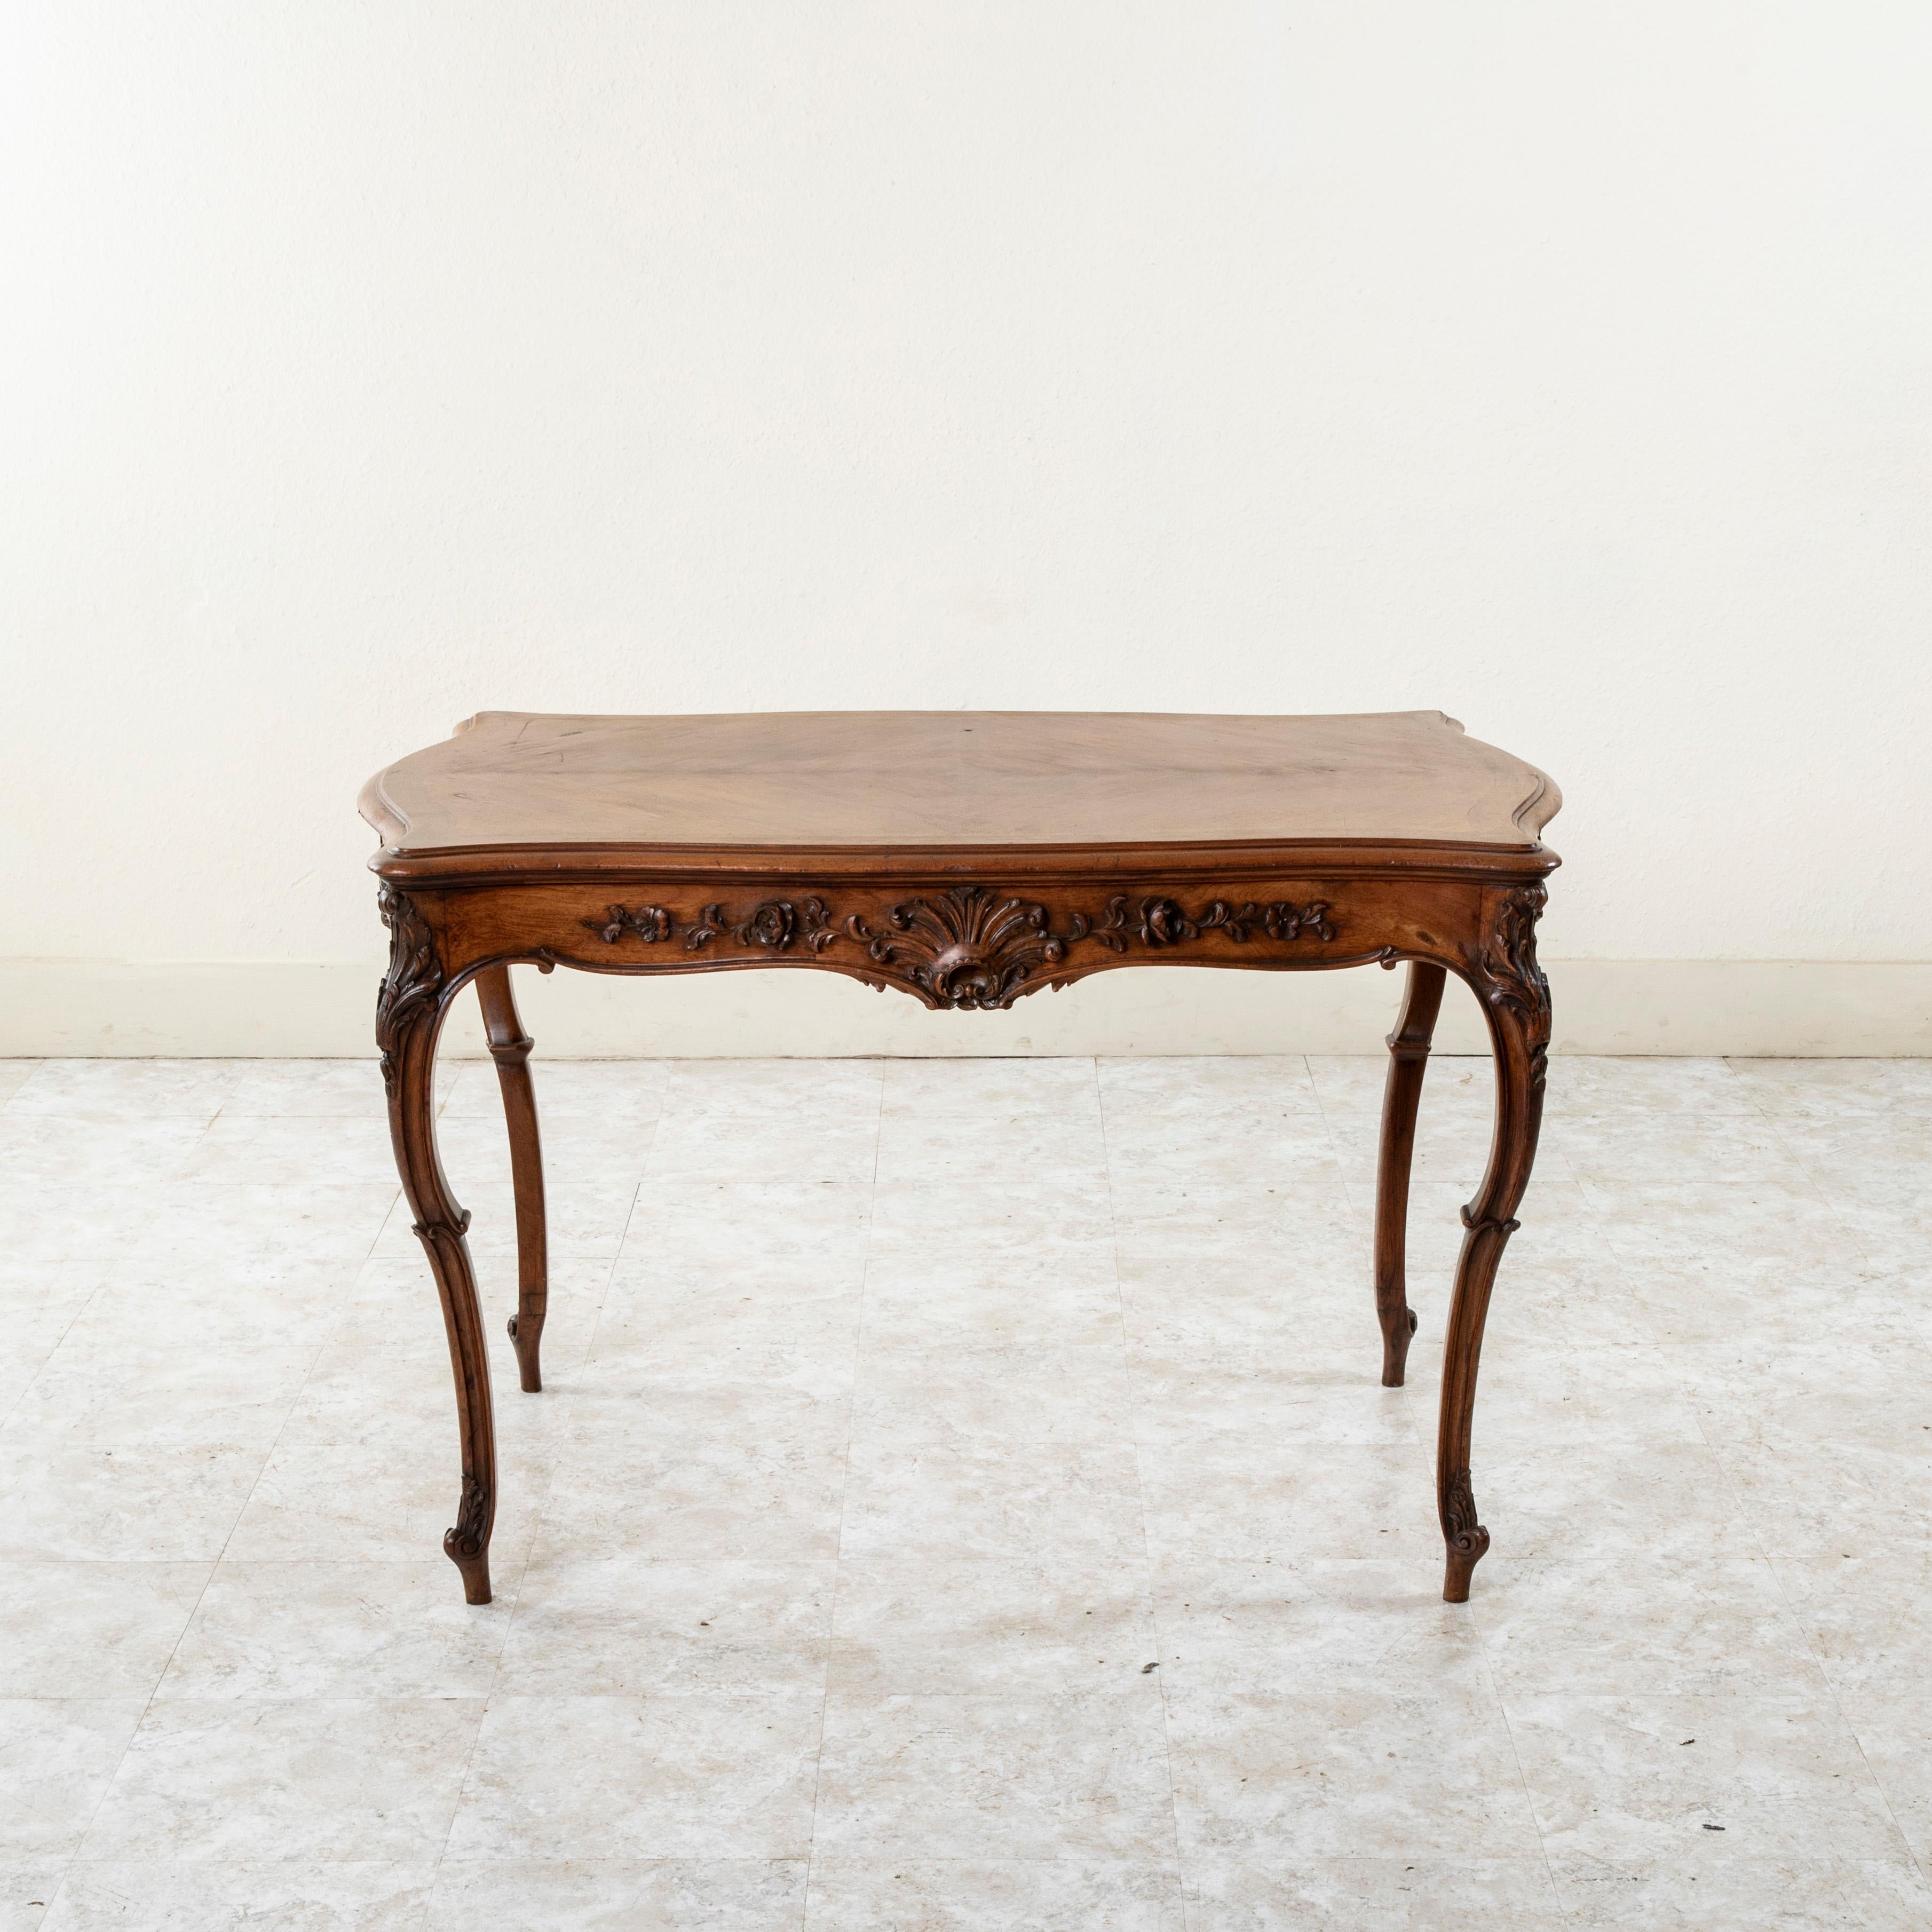 This late nineteenth century French Louis XV style walnut writing table or desk features deep relief hand carved details of shells on all four sides and corners as well as scrolling leaves and a floral motif. A single drawer of dovetail construction